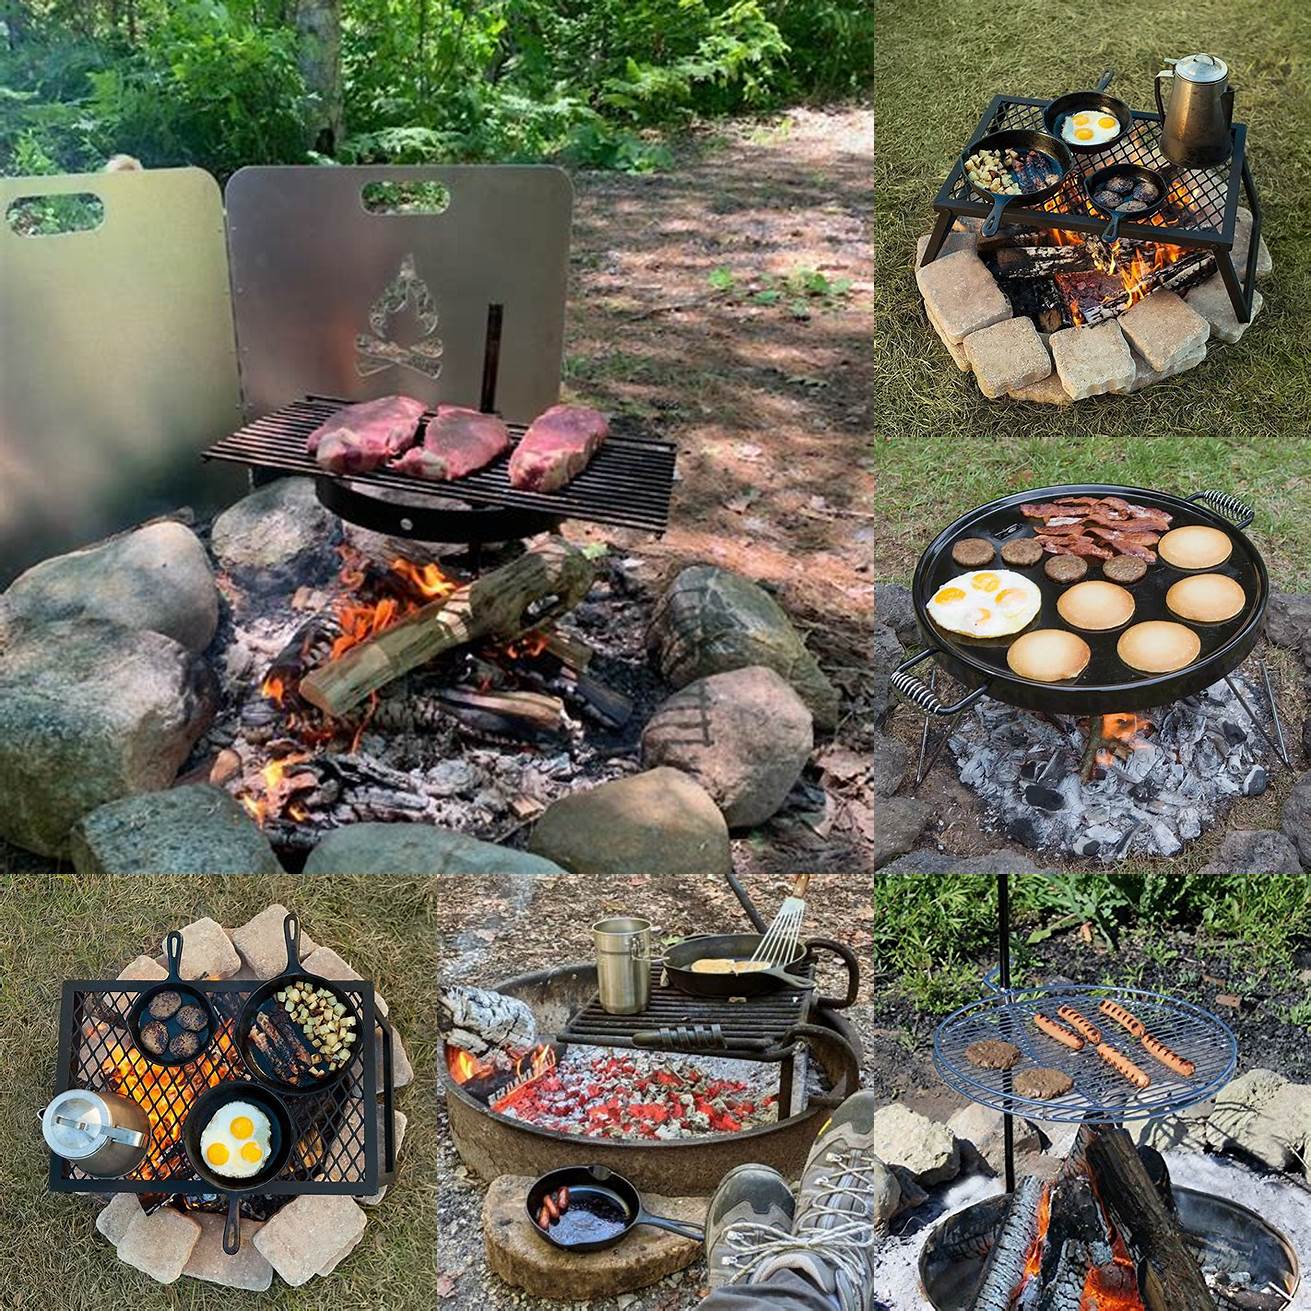 1 The Classic Campfire Take a photo of your portable kitchen next to a cozy campfire This will create a warm and inviting atmosphere